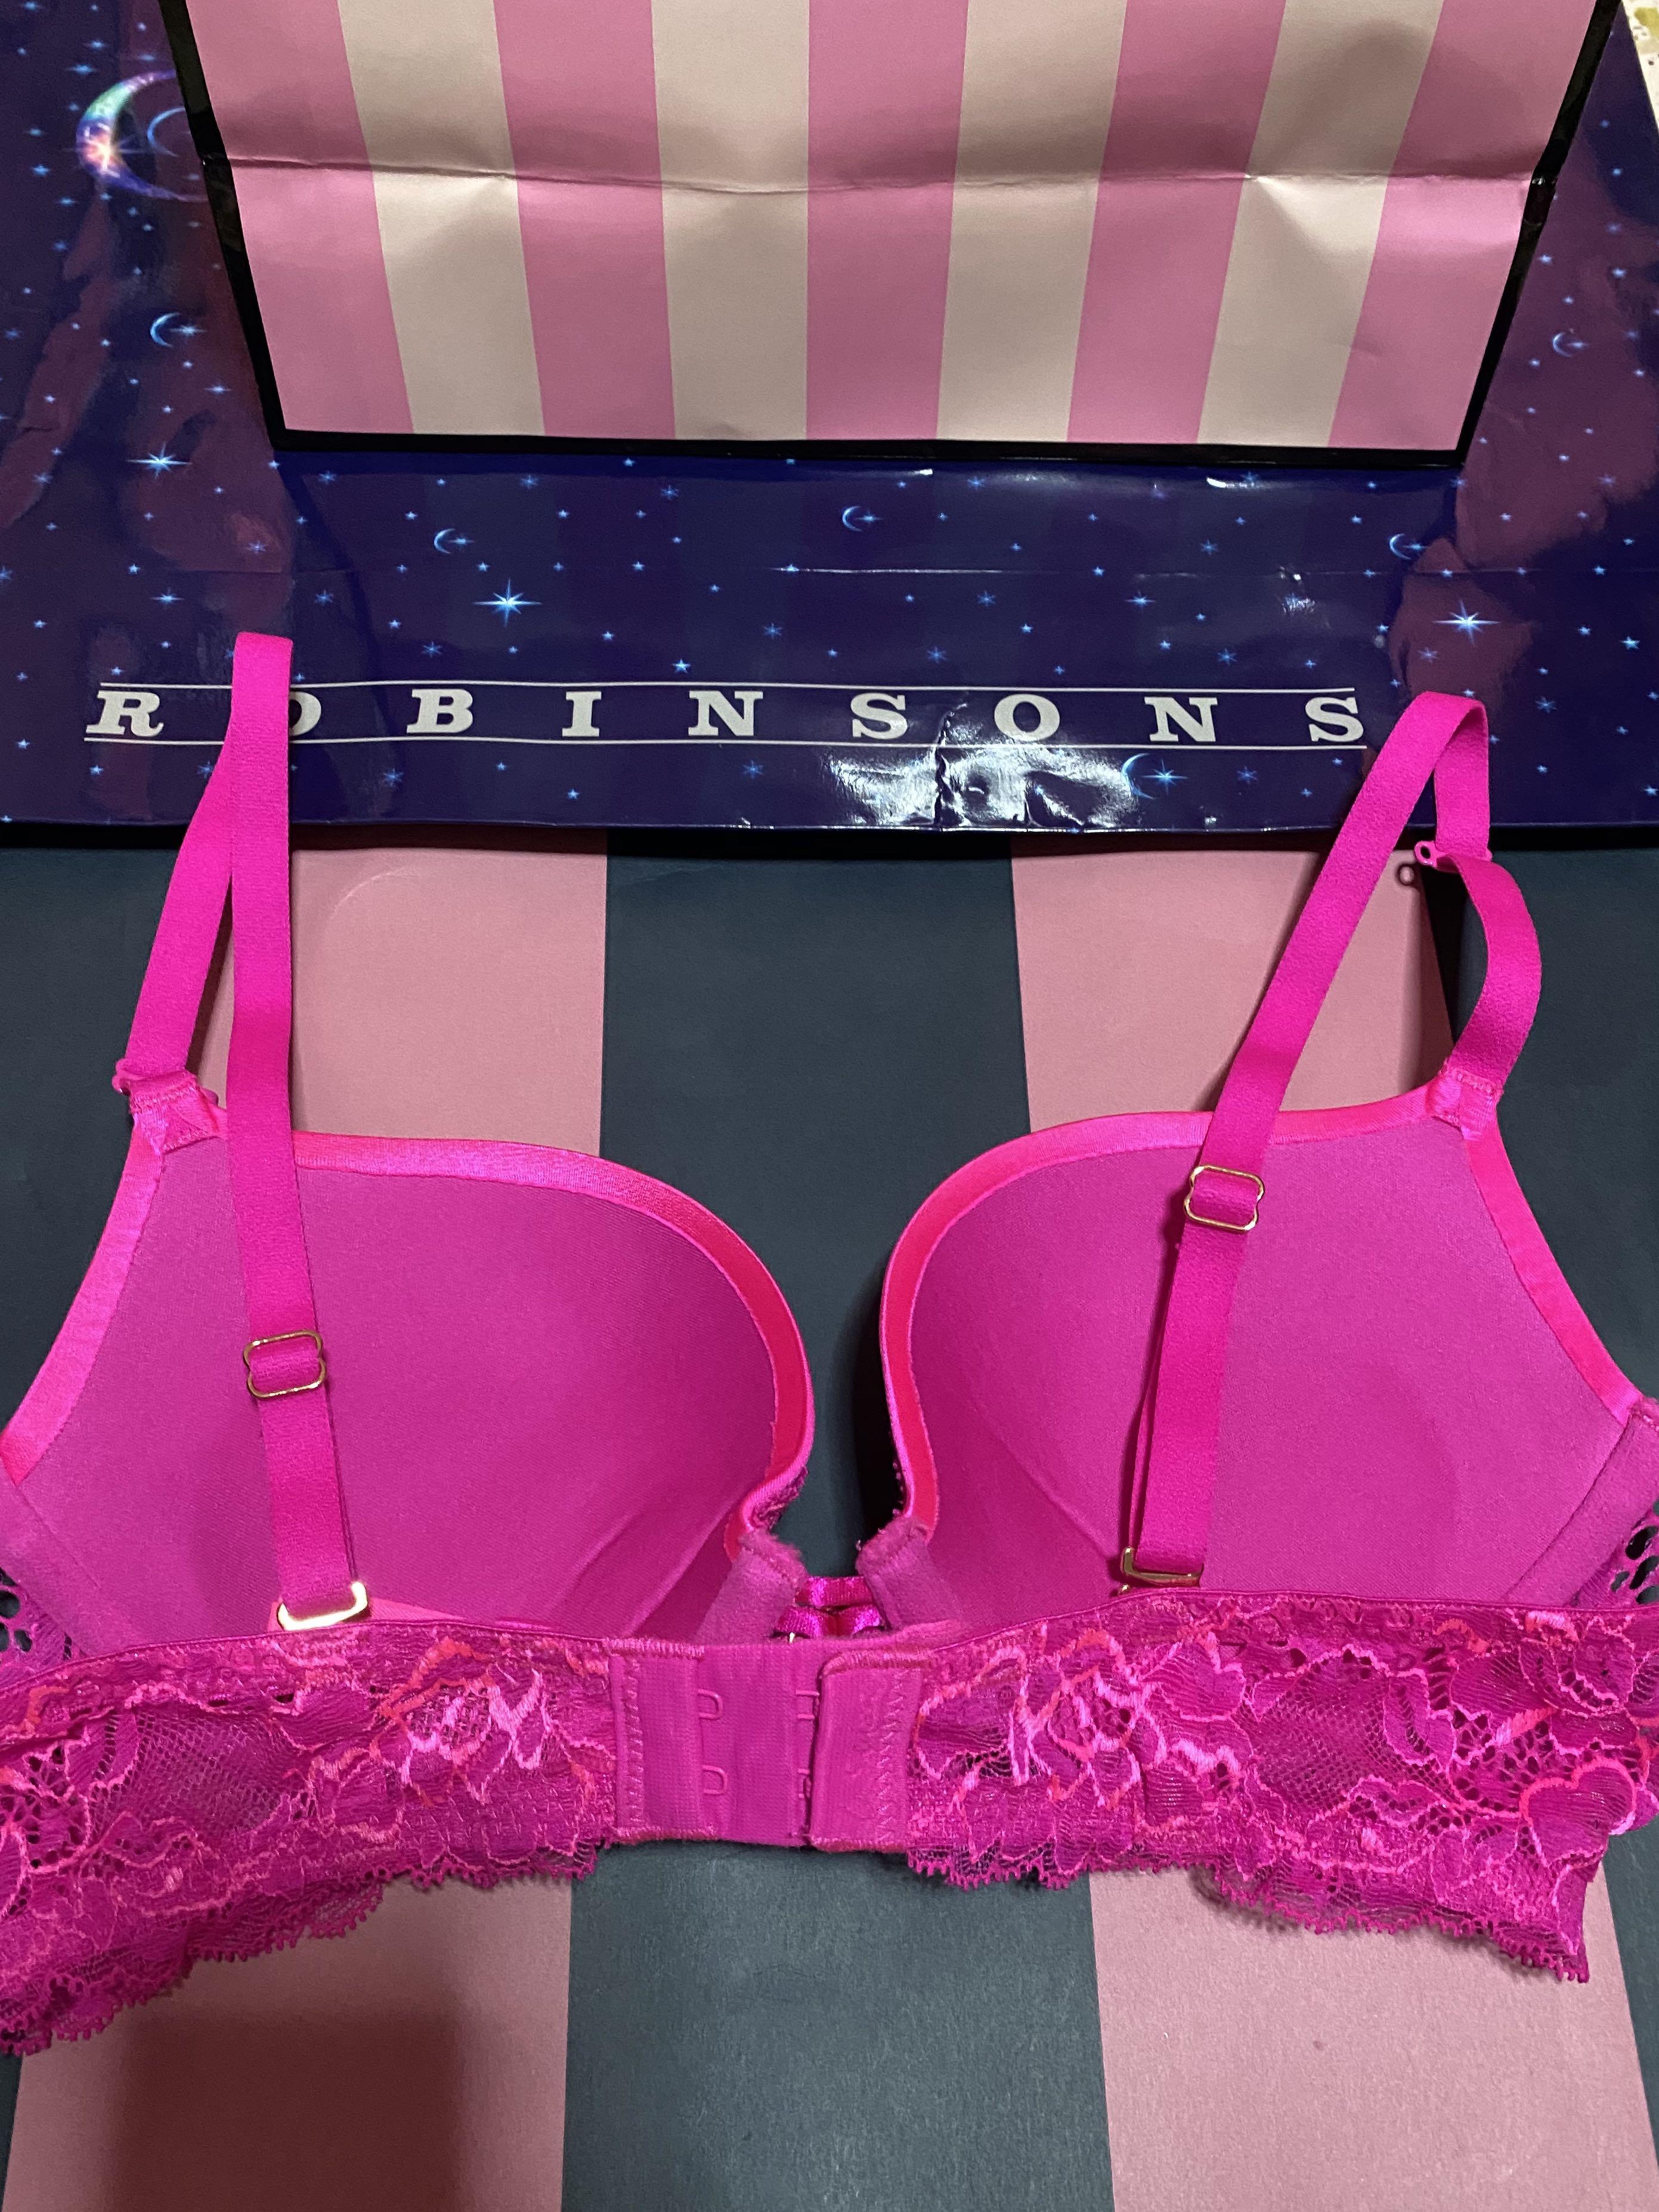 La Senza Malaysia - Beyond Sexy bra, gel padded for natural sexy cleavage.  #NEED 💣💞 In new styles, feeling the Summer Vibes! Get 1 FREE bra w/ any  bra purchase when you